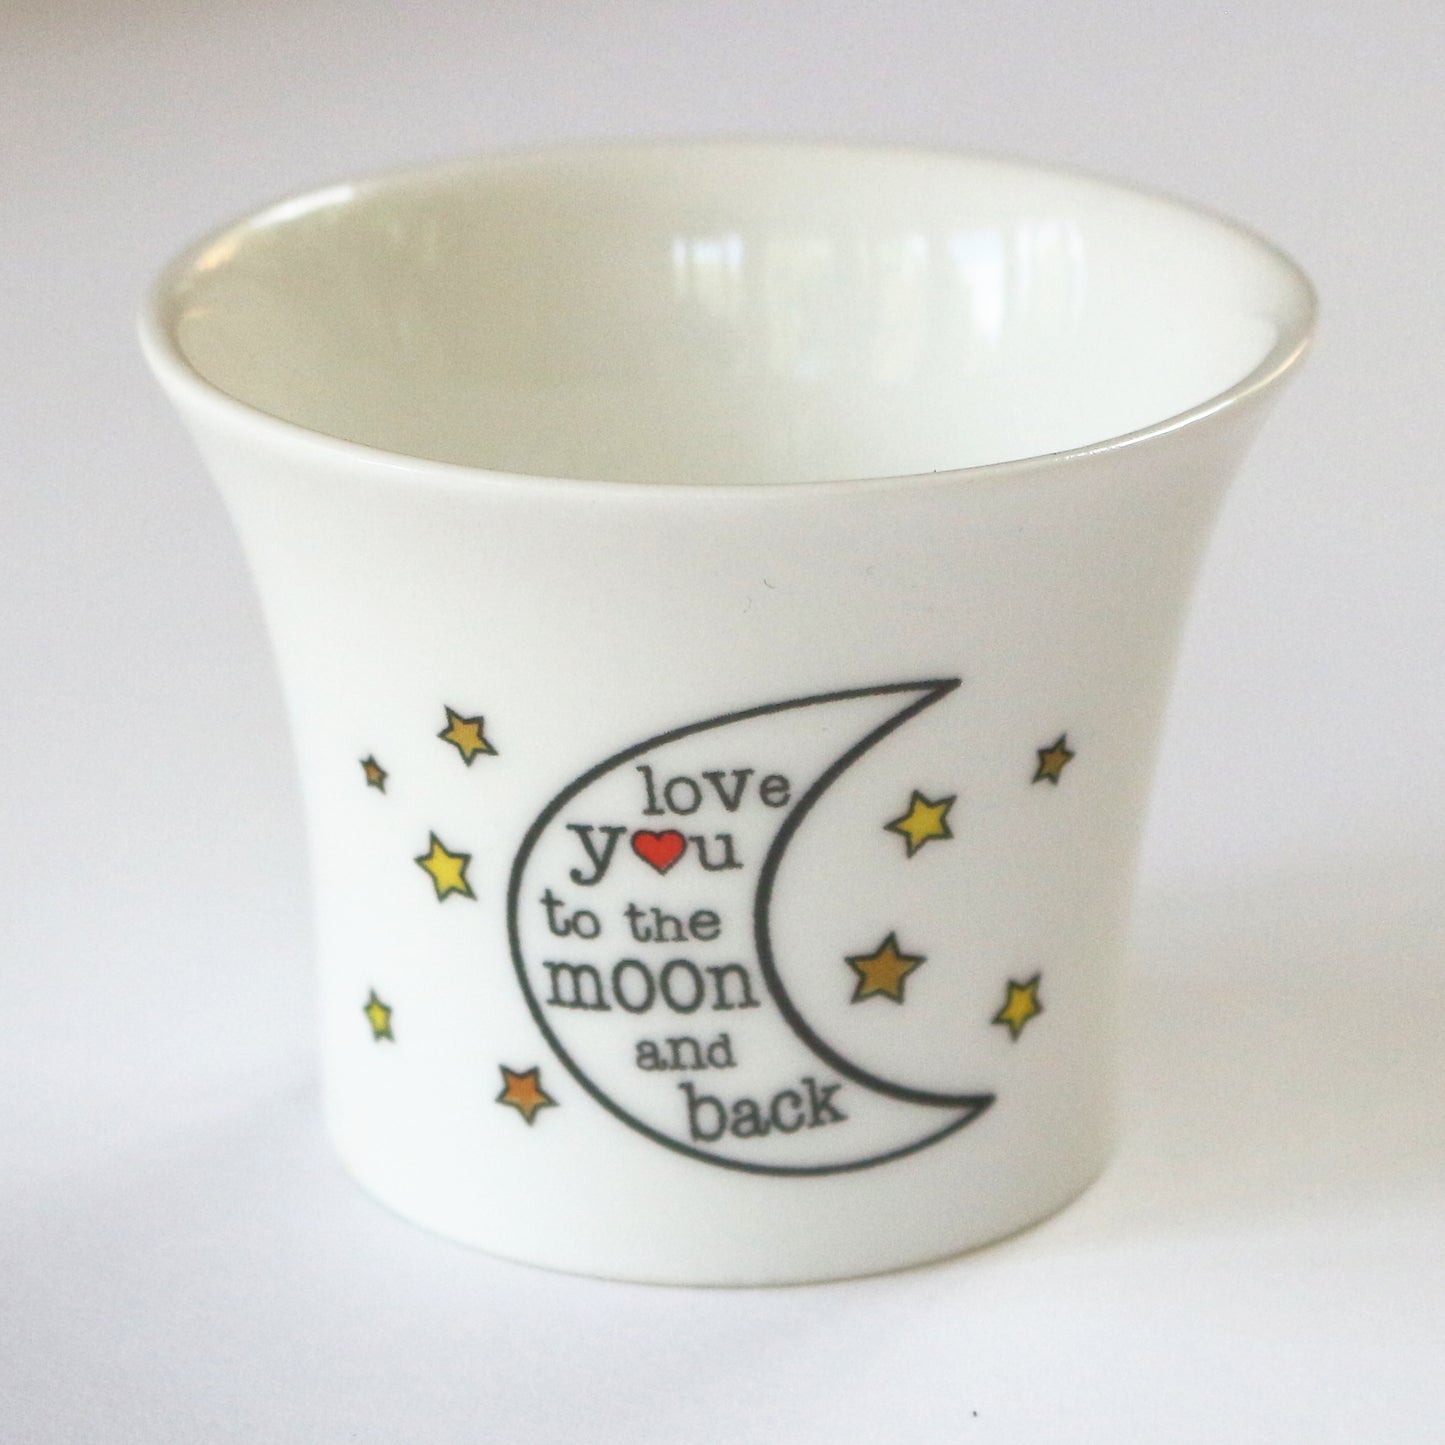 Bone China Tea Light Holder - Love you to the Moon and Back